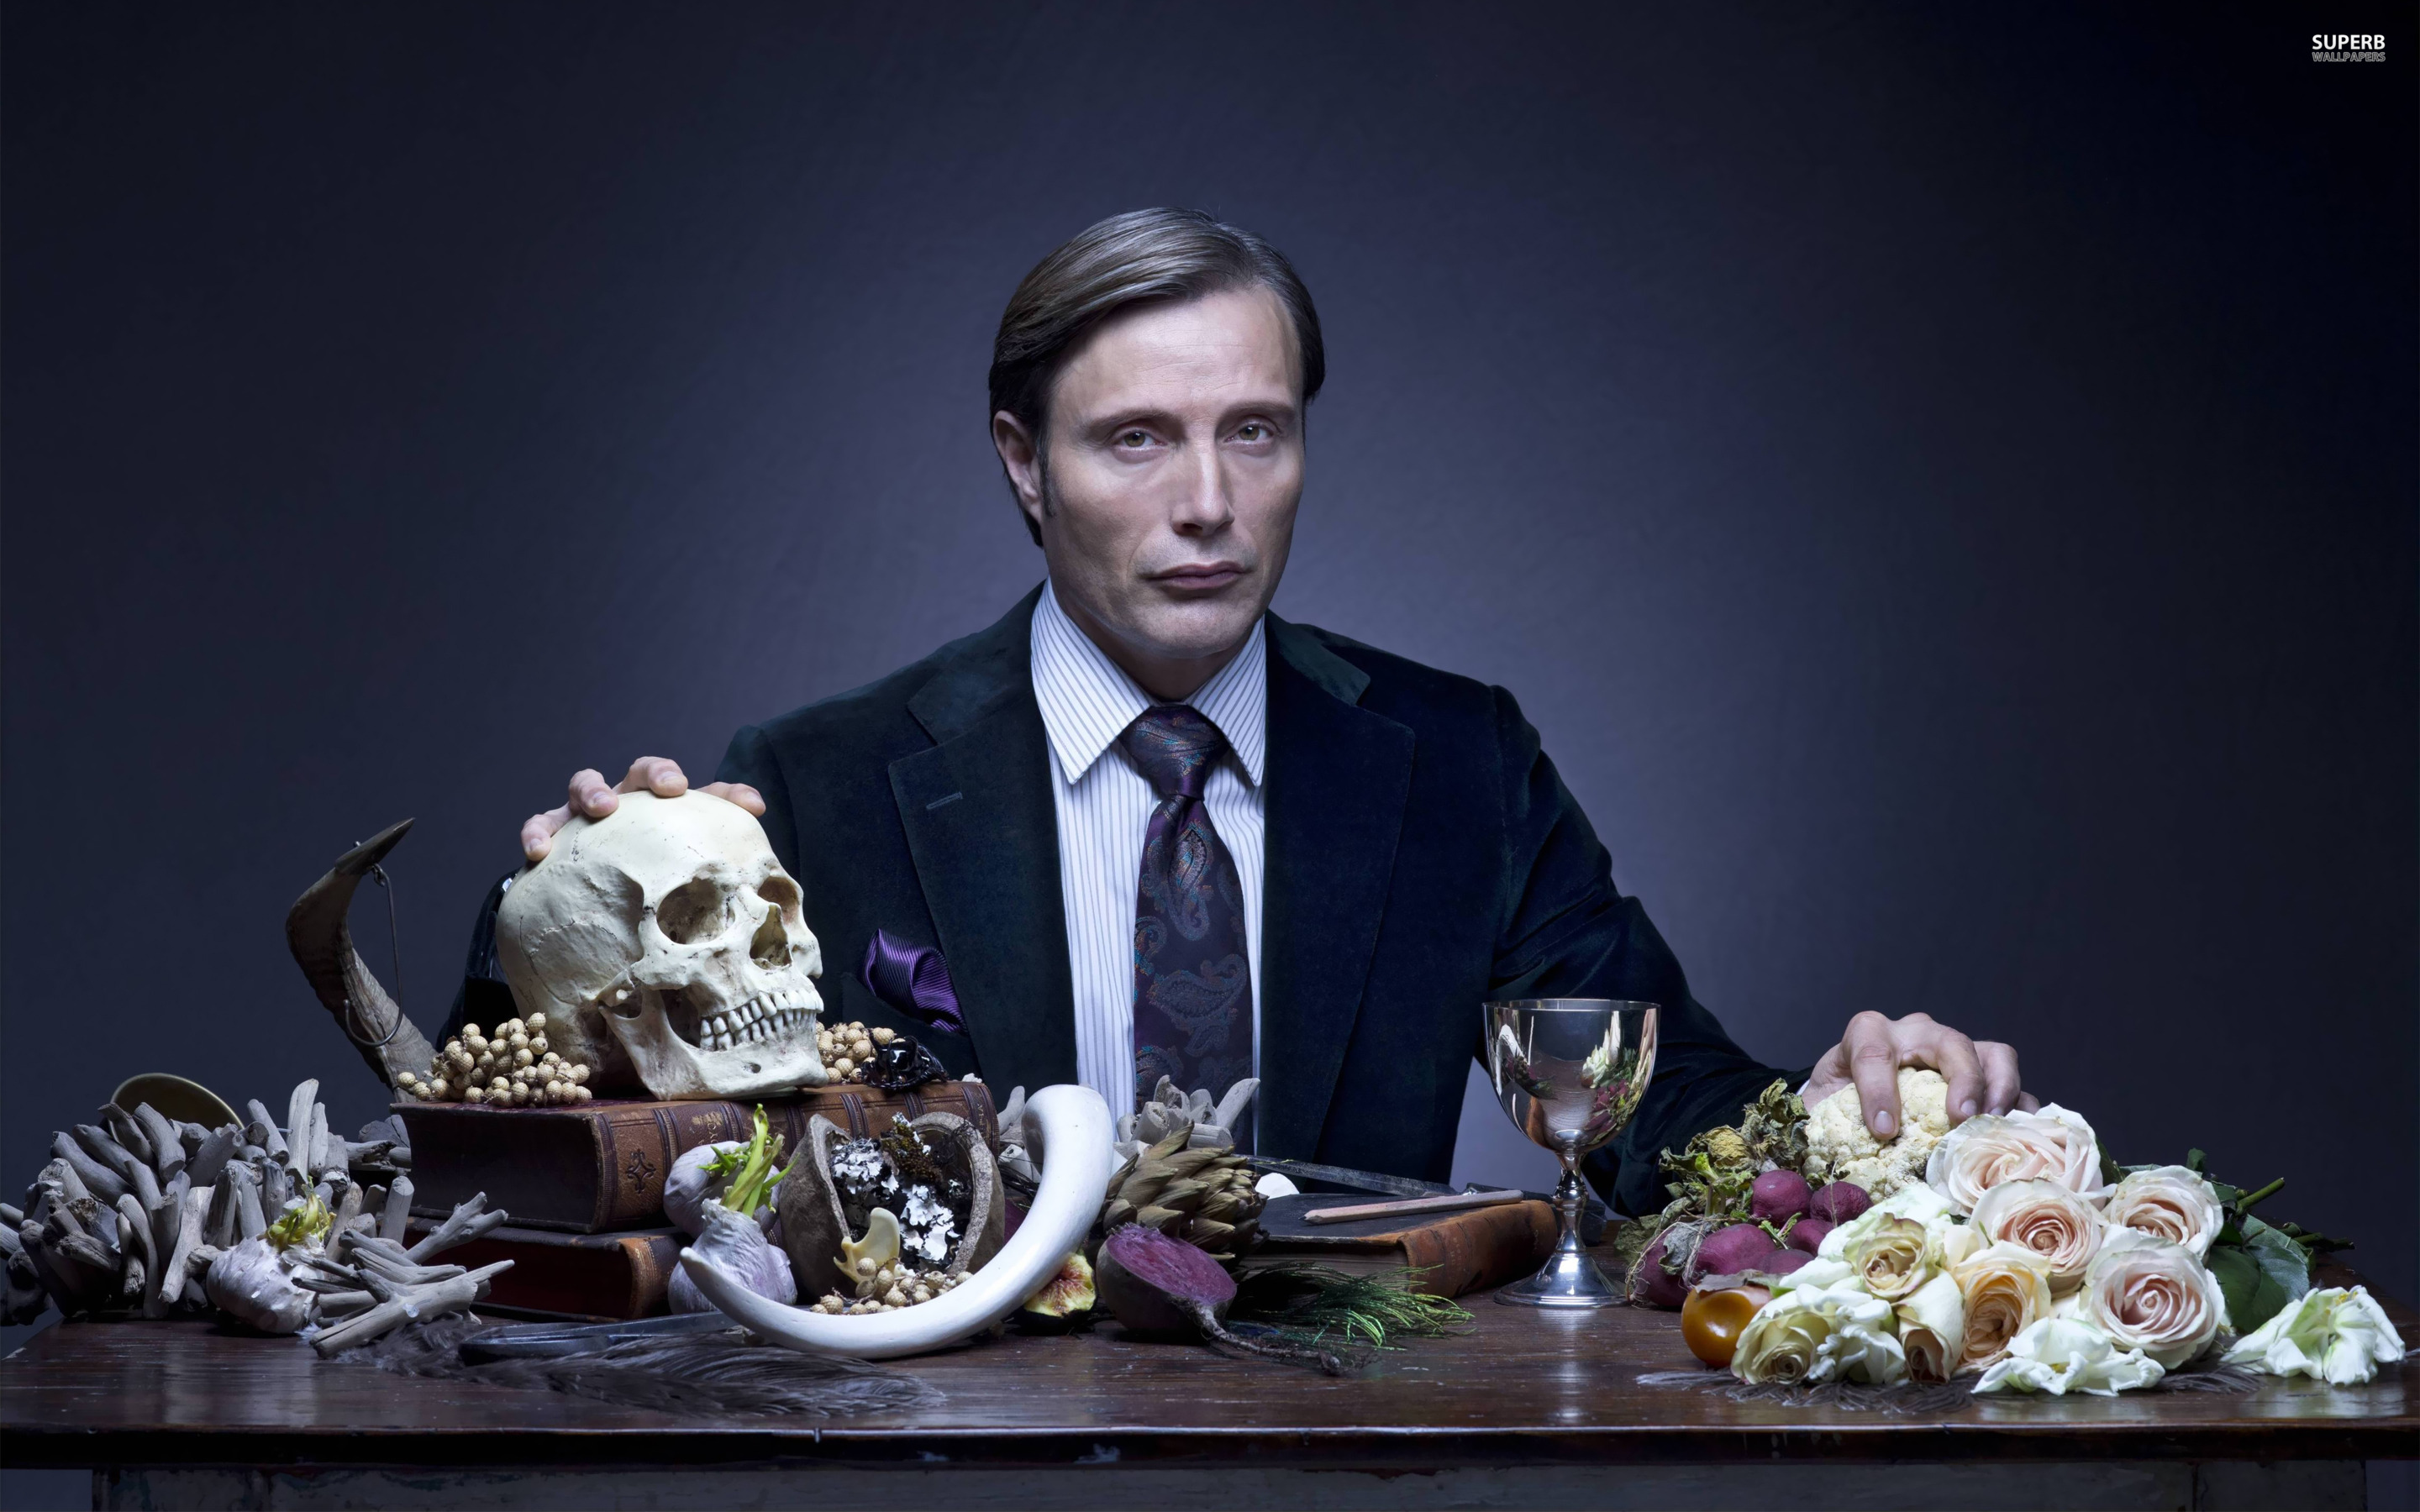 Images of Hannibal | 2880x1800